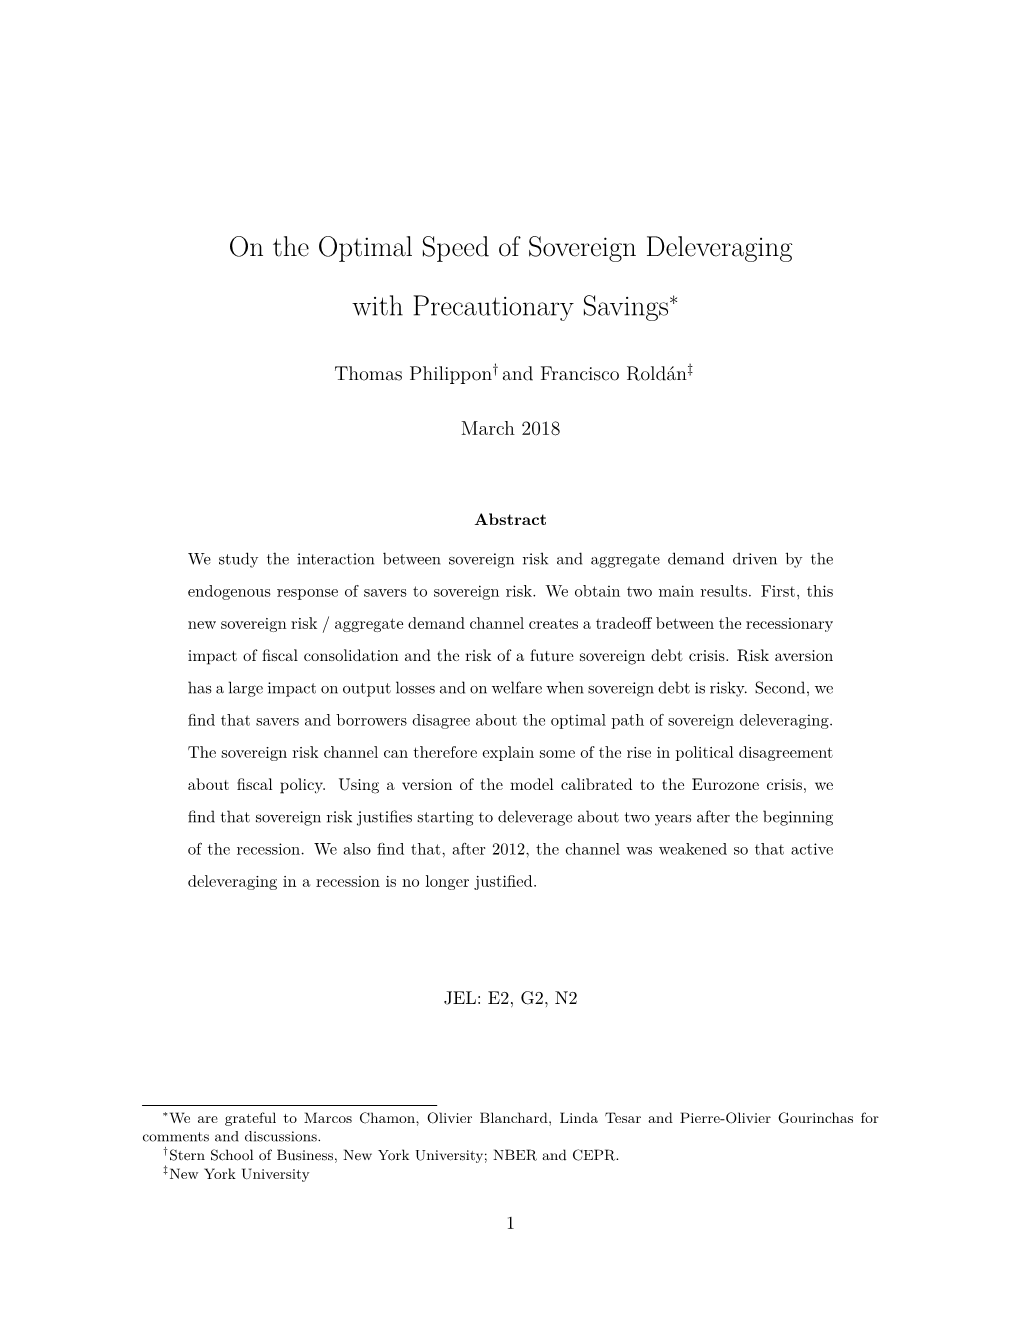 On the Optimal Speed of Sovereign Deleveraging